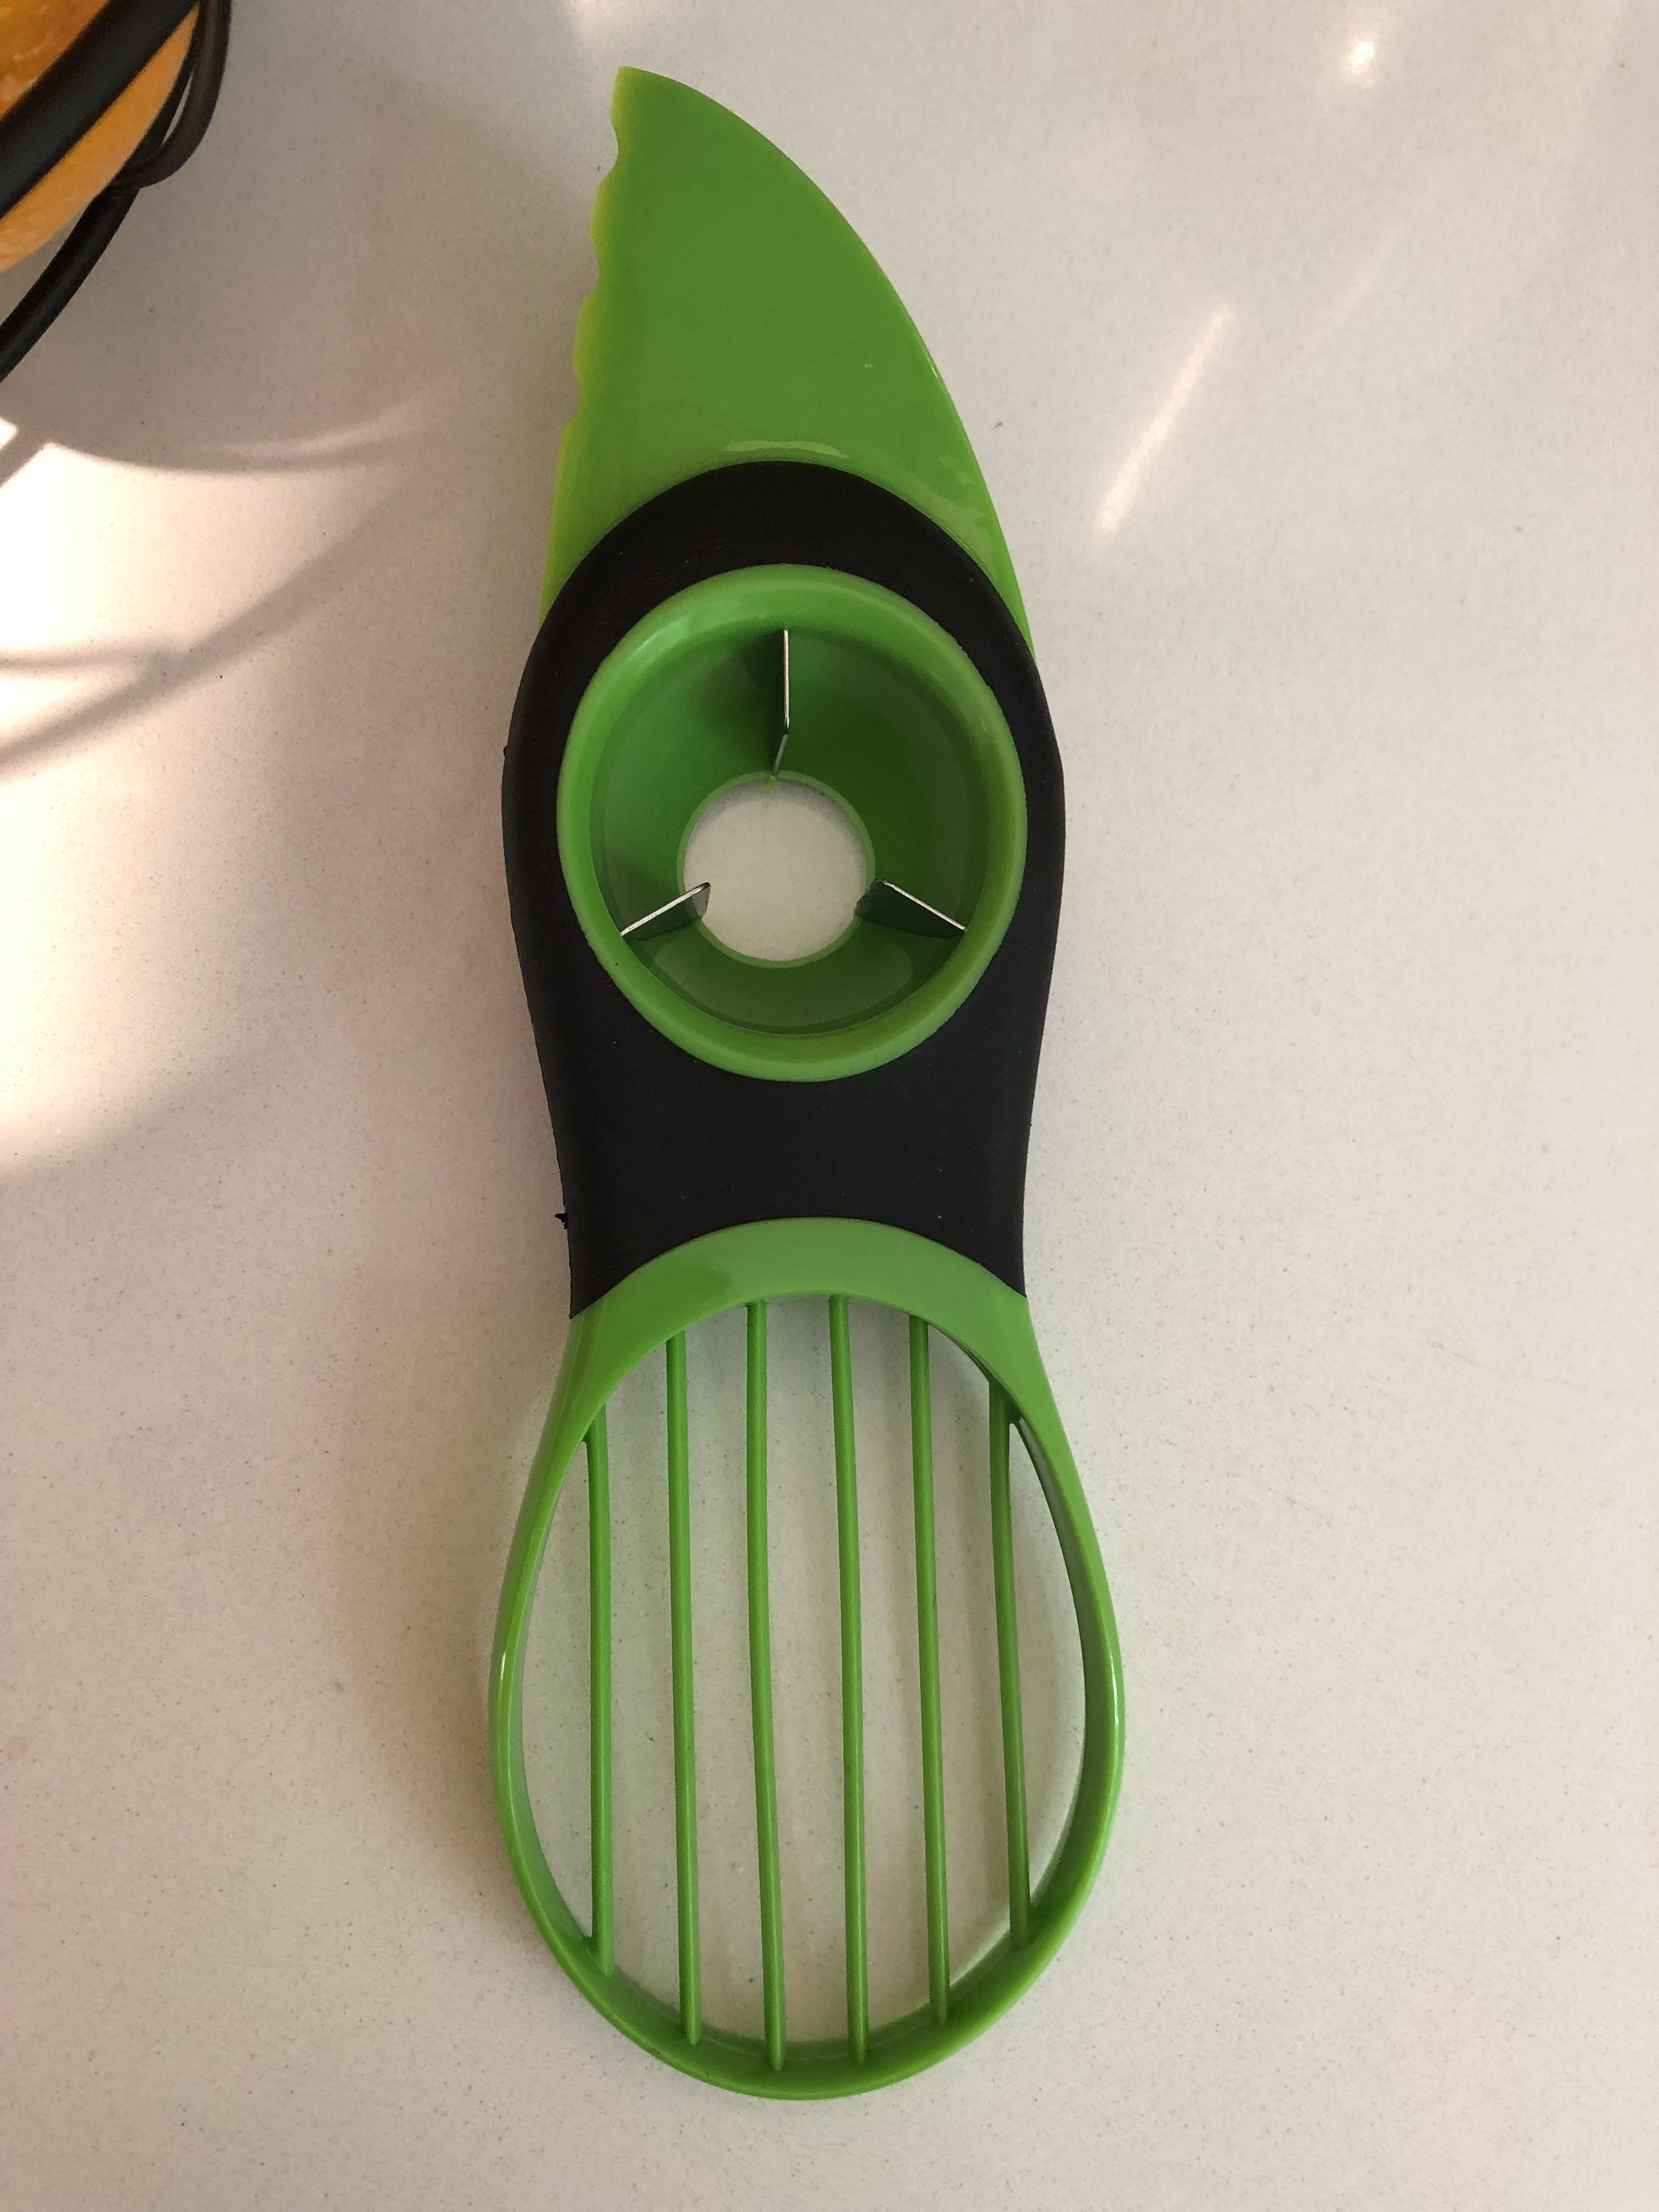 A tool used to cut, pit, and slice avocados